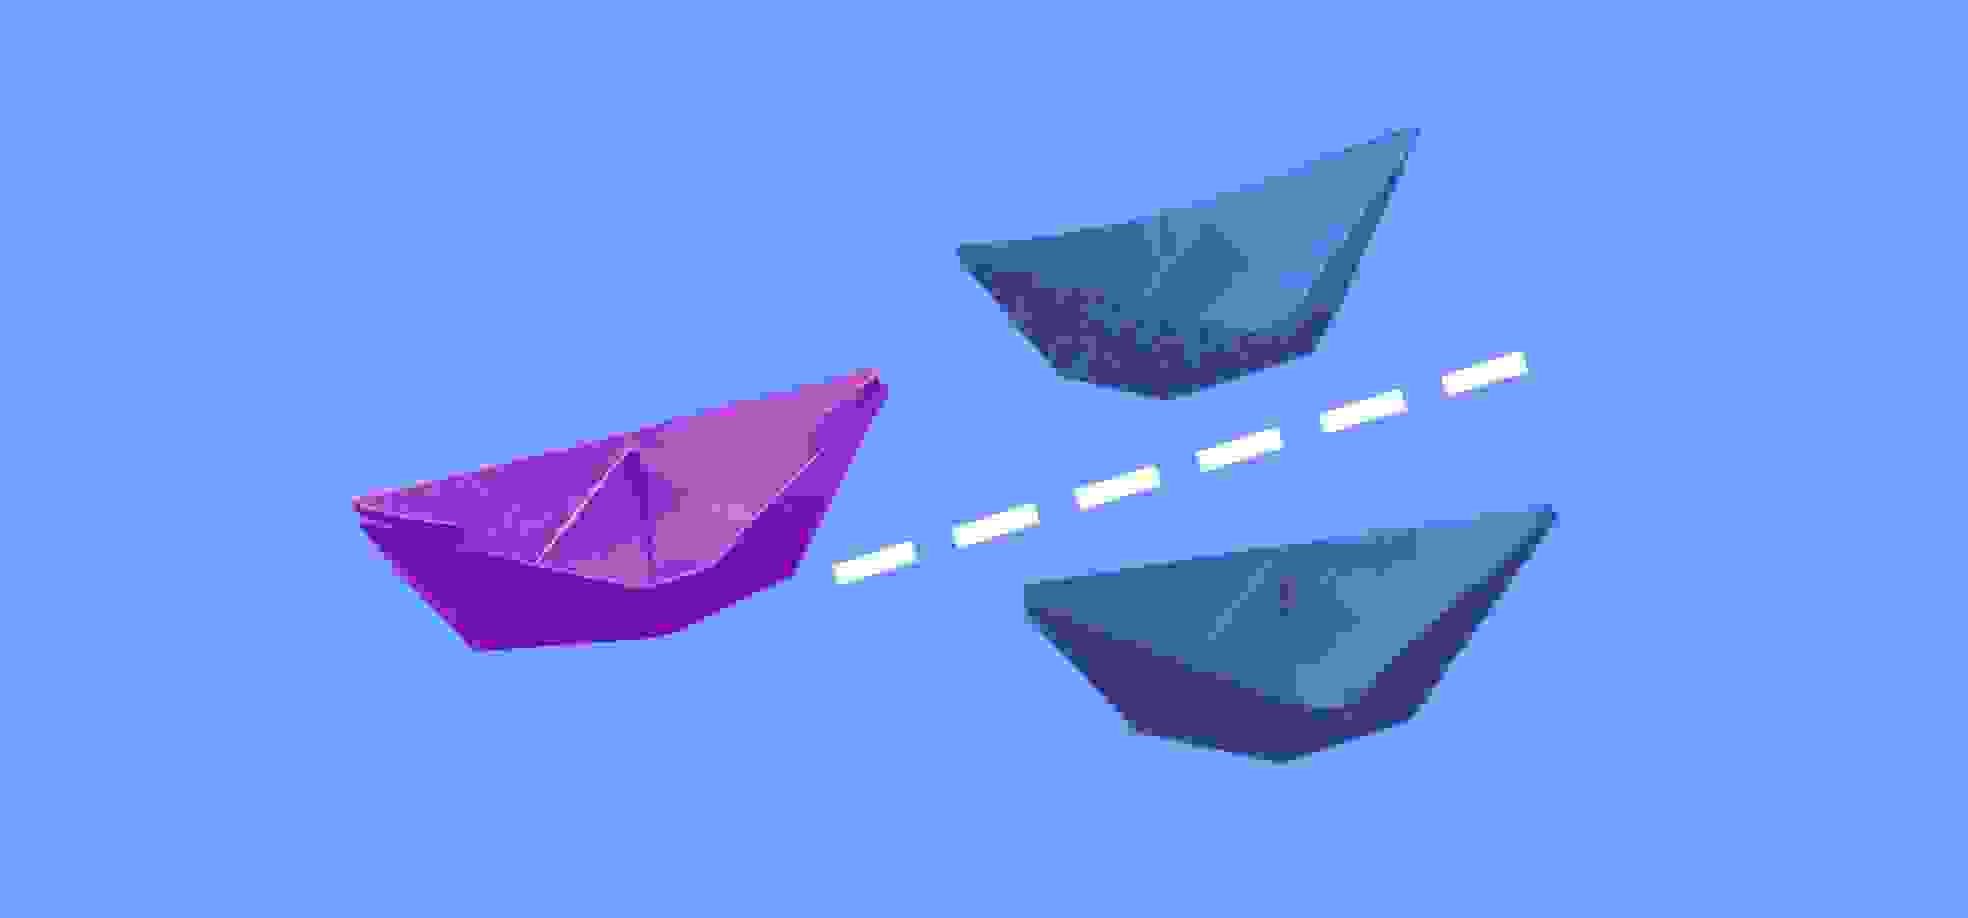 blue and purple paper boat illustration on a blue background